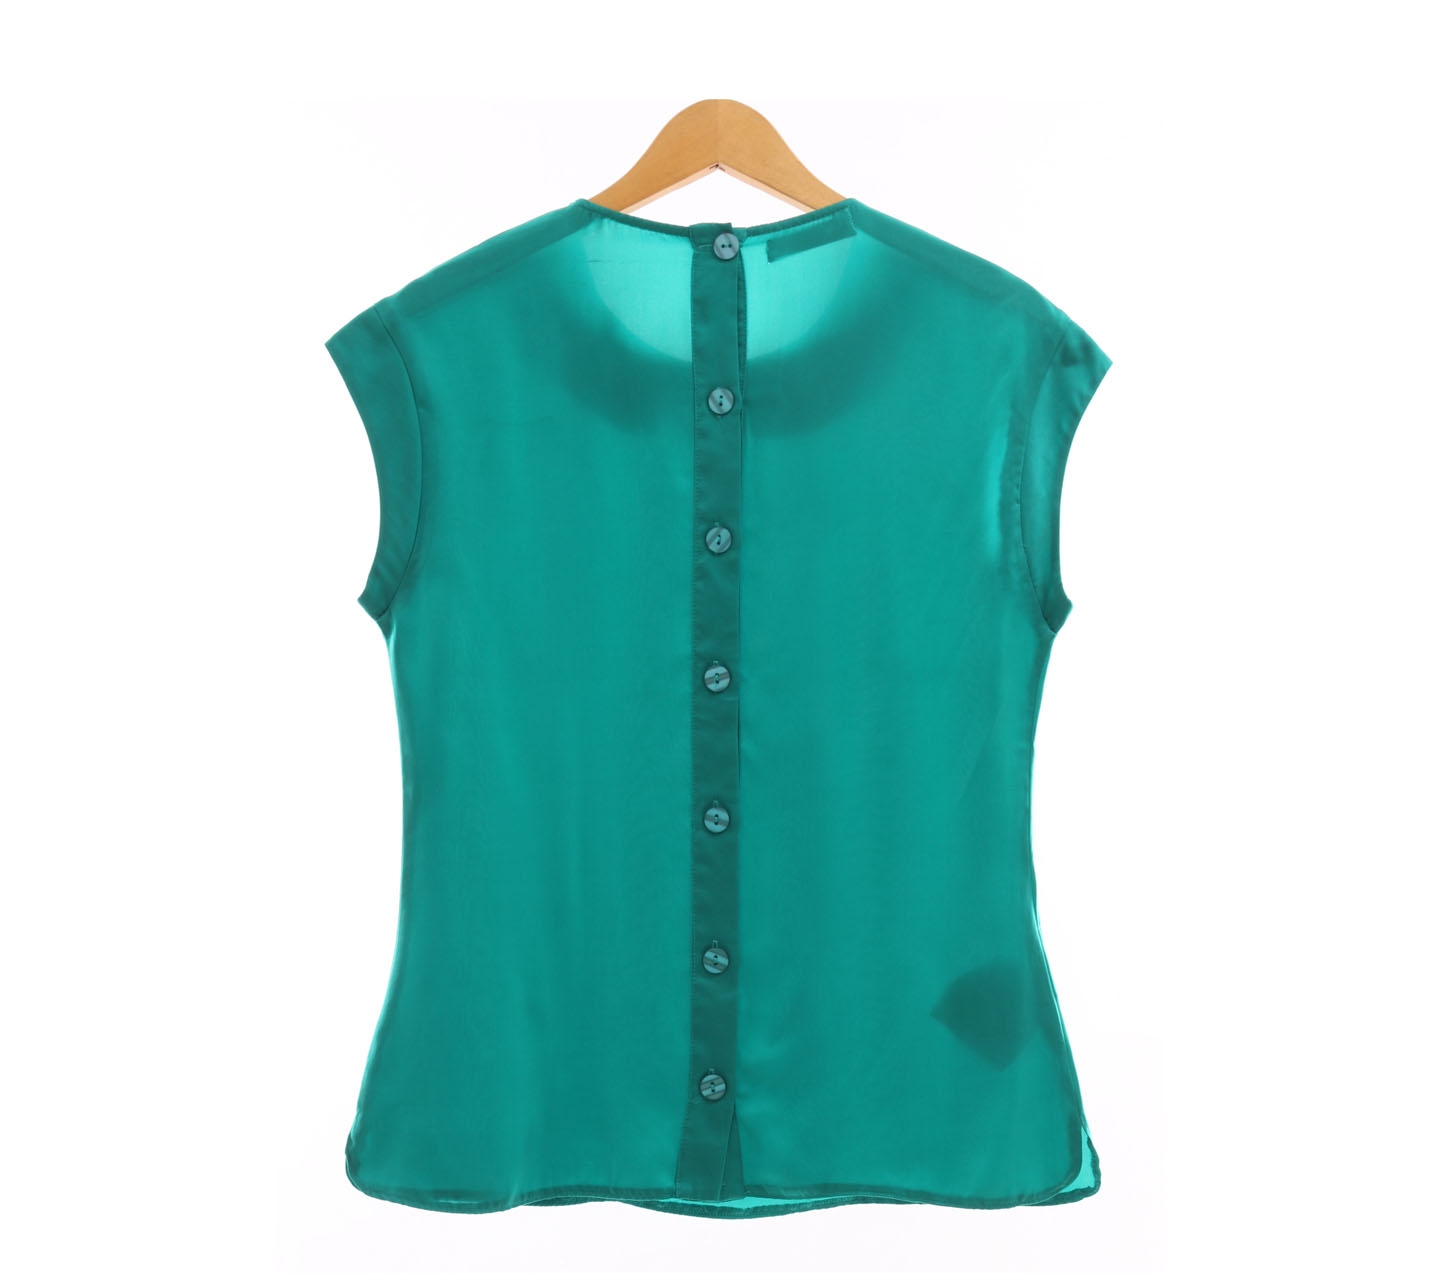 Suite Blanco Green Pearl Blouse